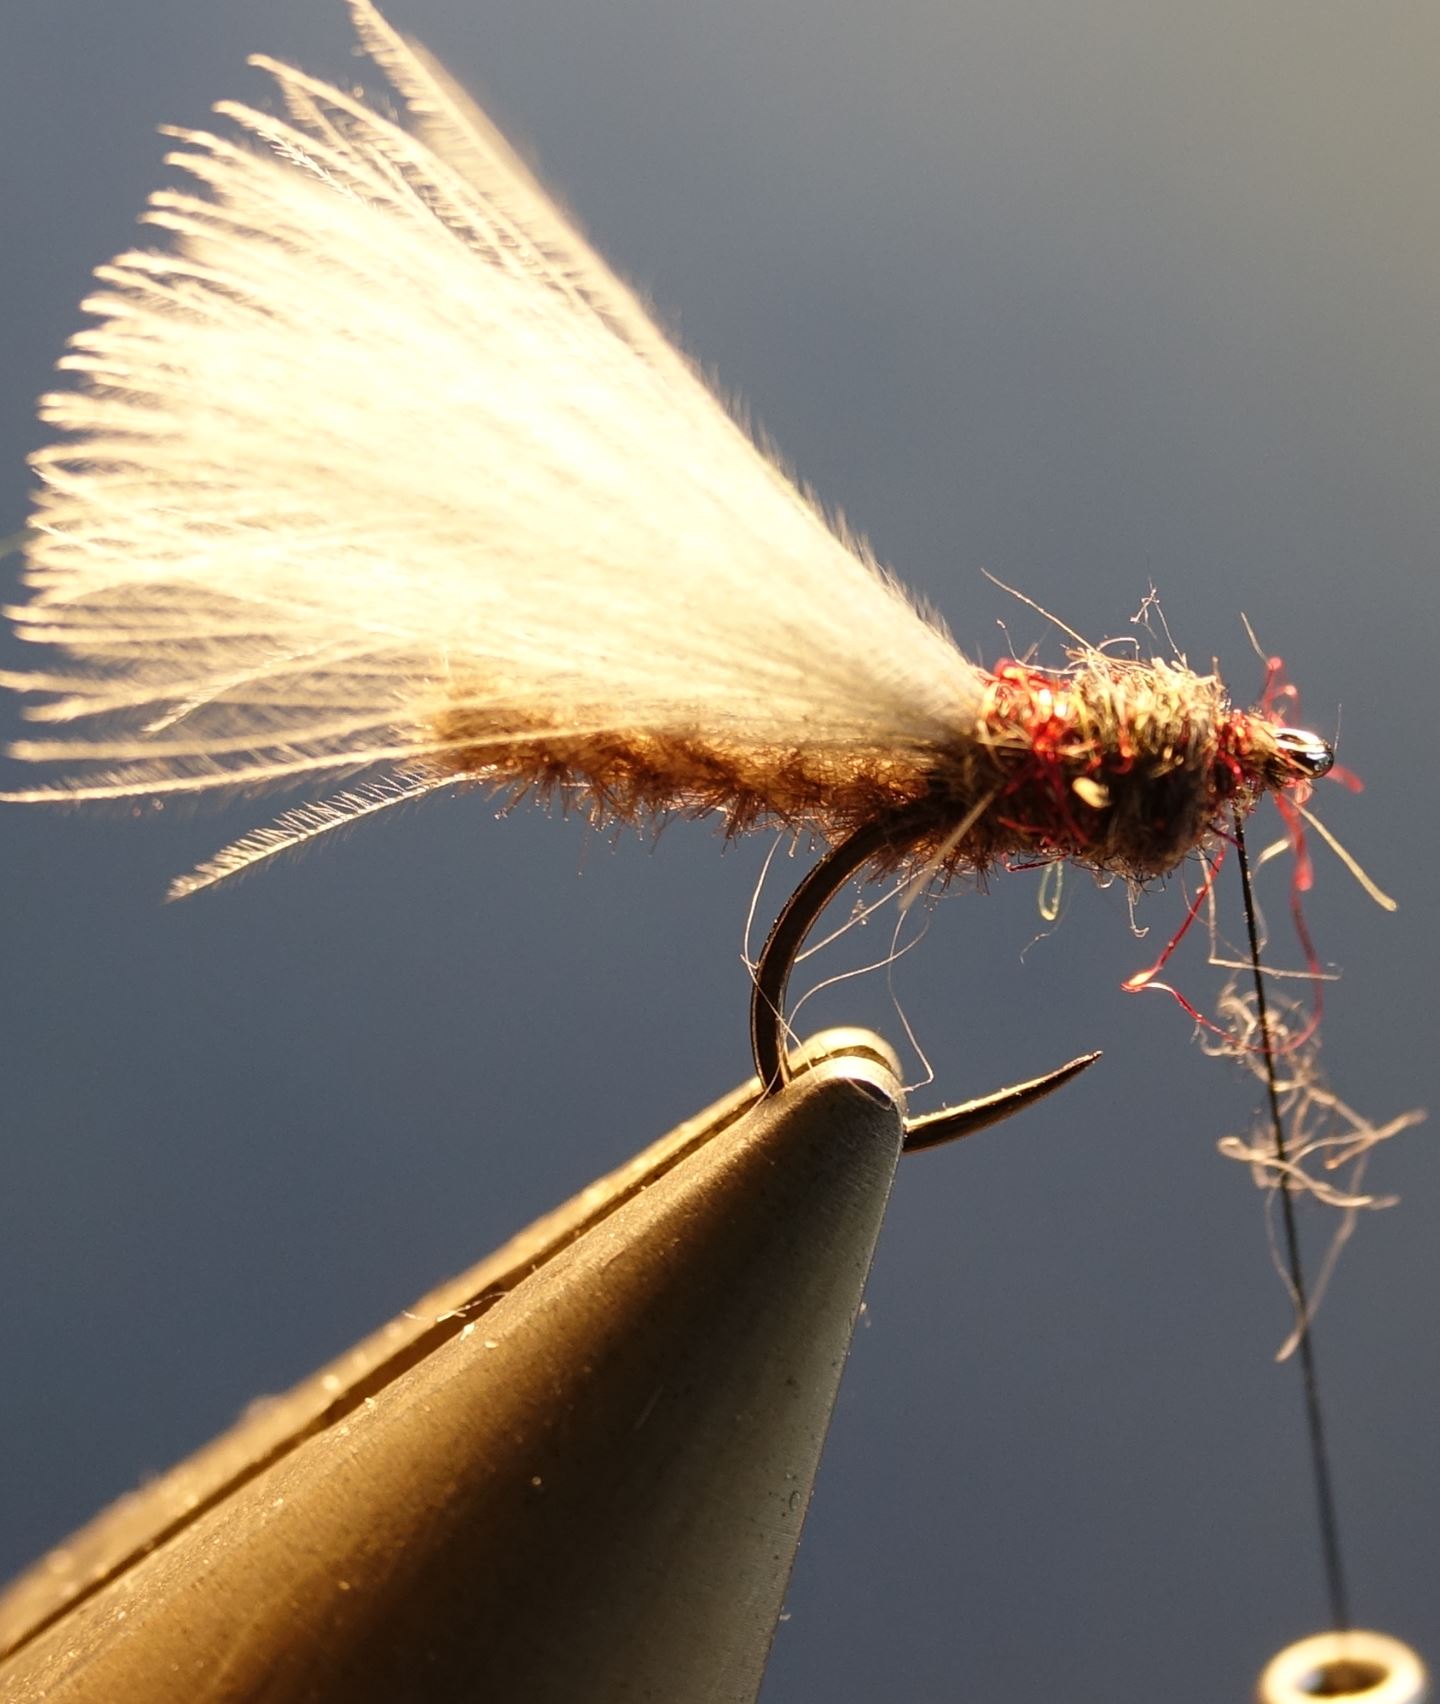 Chironome microchenille CDC dubbing mouche fly tying eclosion